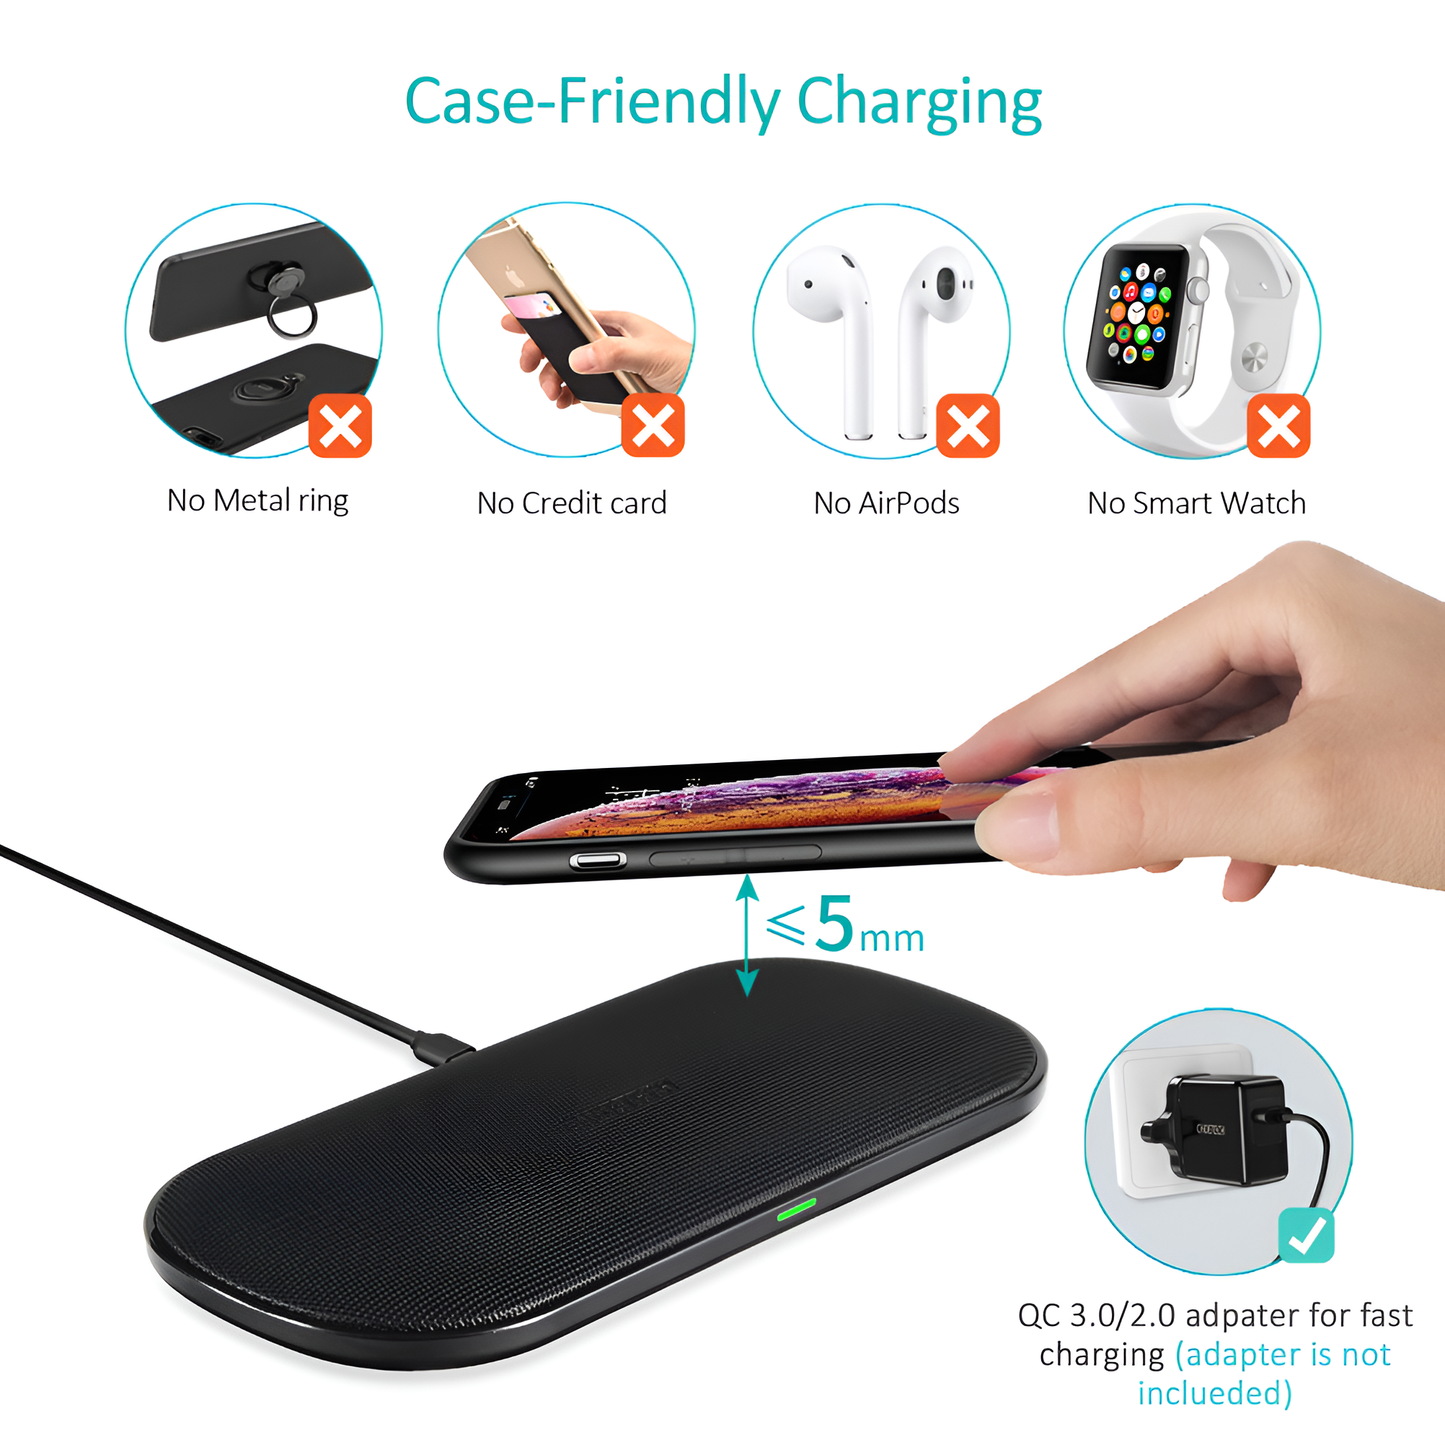 Choetech 5-Coil 15W Dual Fast Wireless Charger for Wireless charging Supported Mobiles, T535-S by jcbl accessories, Case- FRIENDLY CHARGING | NO METAL RING| No credit card | No Airpods | No smart watch| 5MM| ac 3.0/2.0 adpater for fast | ~ charging (adapter is not ~~ inclueded)